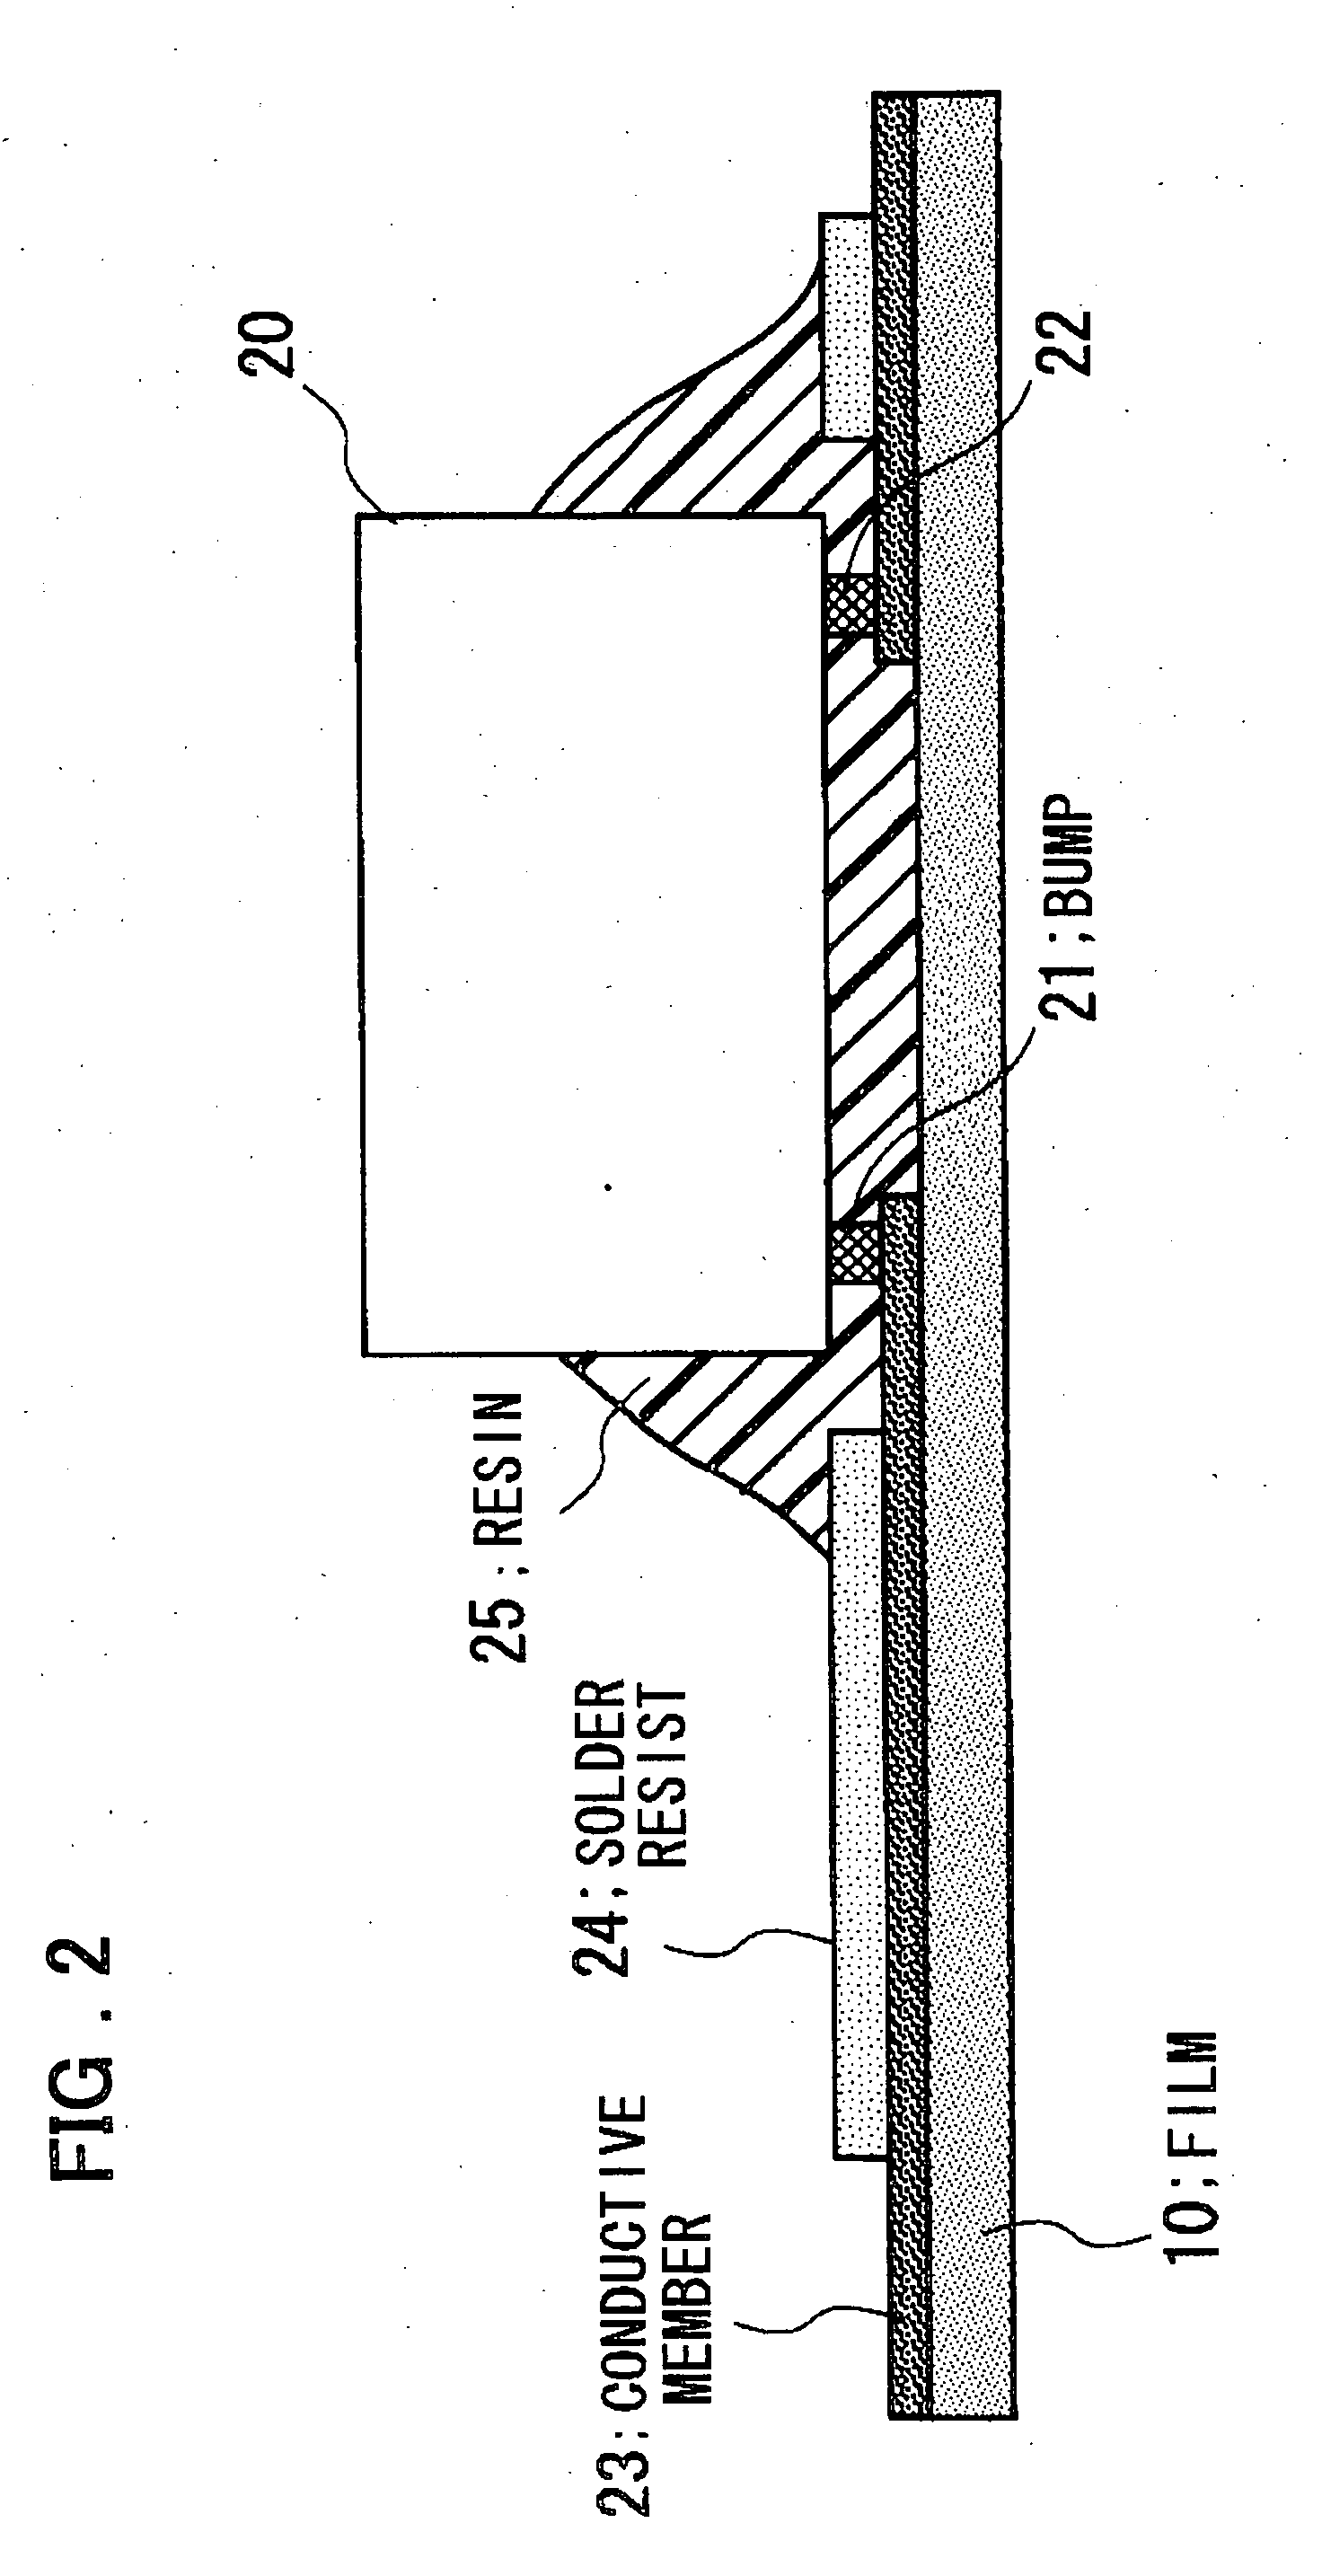 Driver device and display device